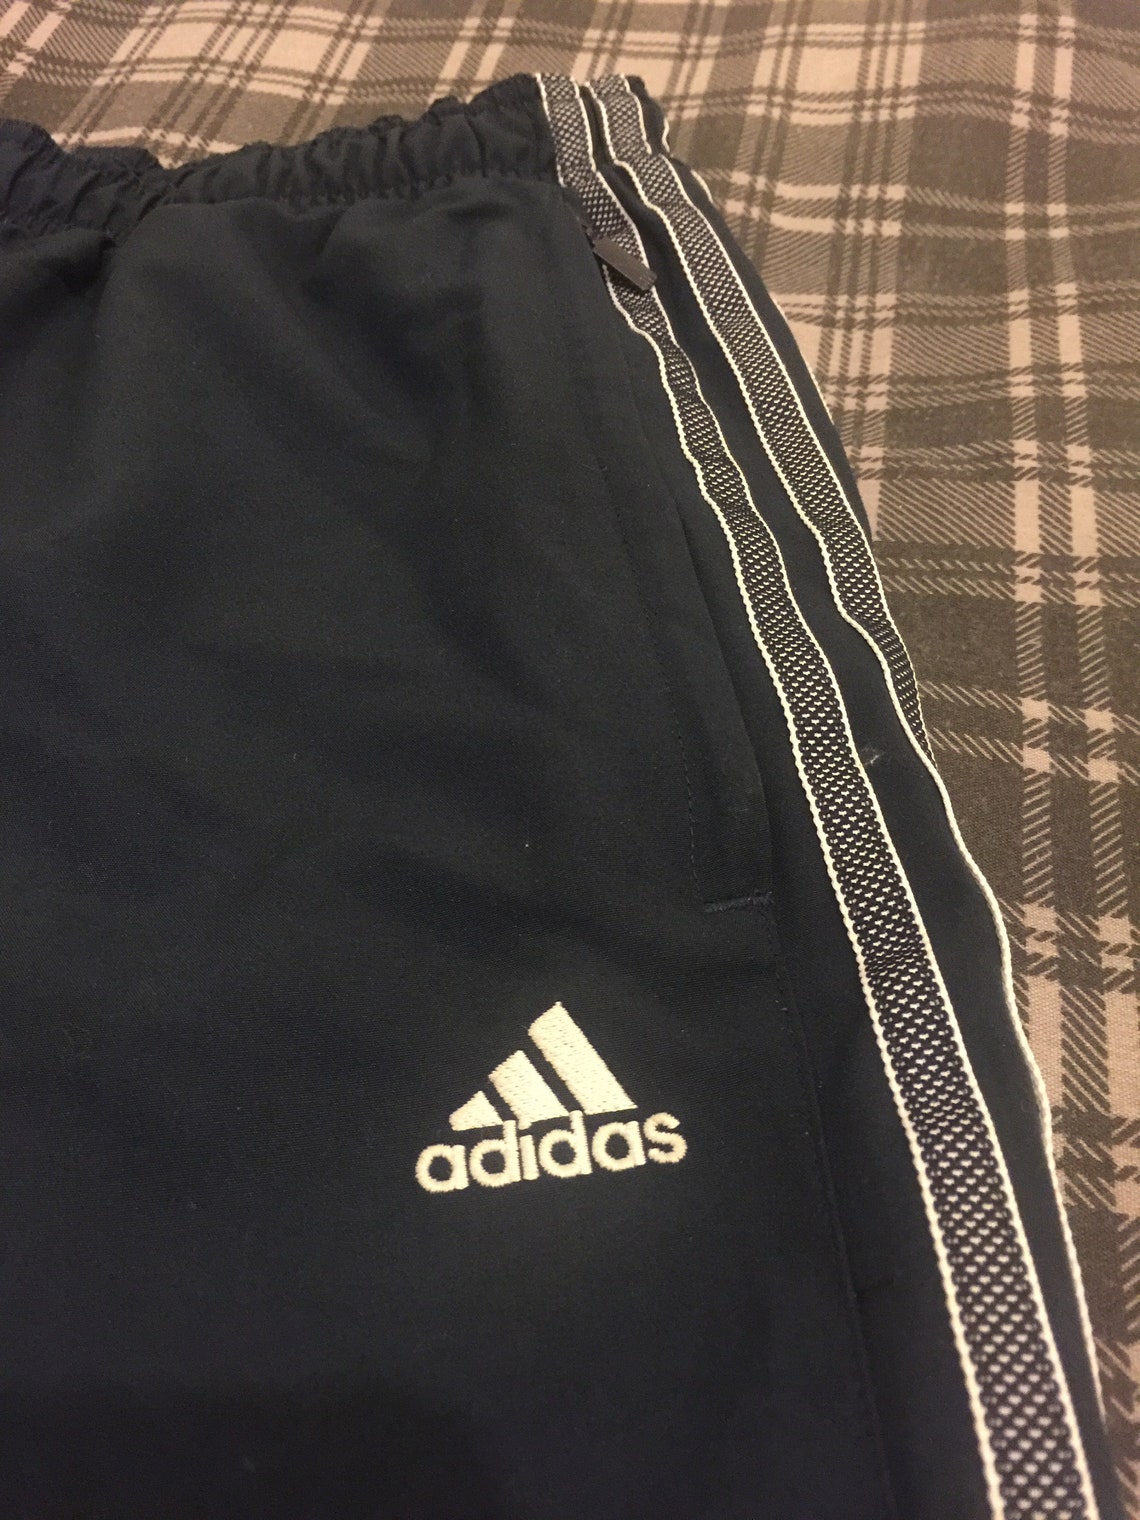 Scally Lads Worn Used Mens 28 Adidas Joggers - Etsy